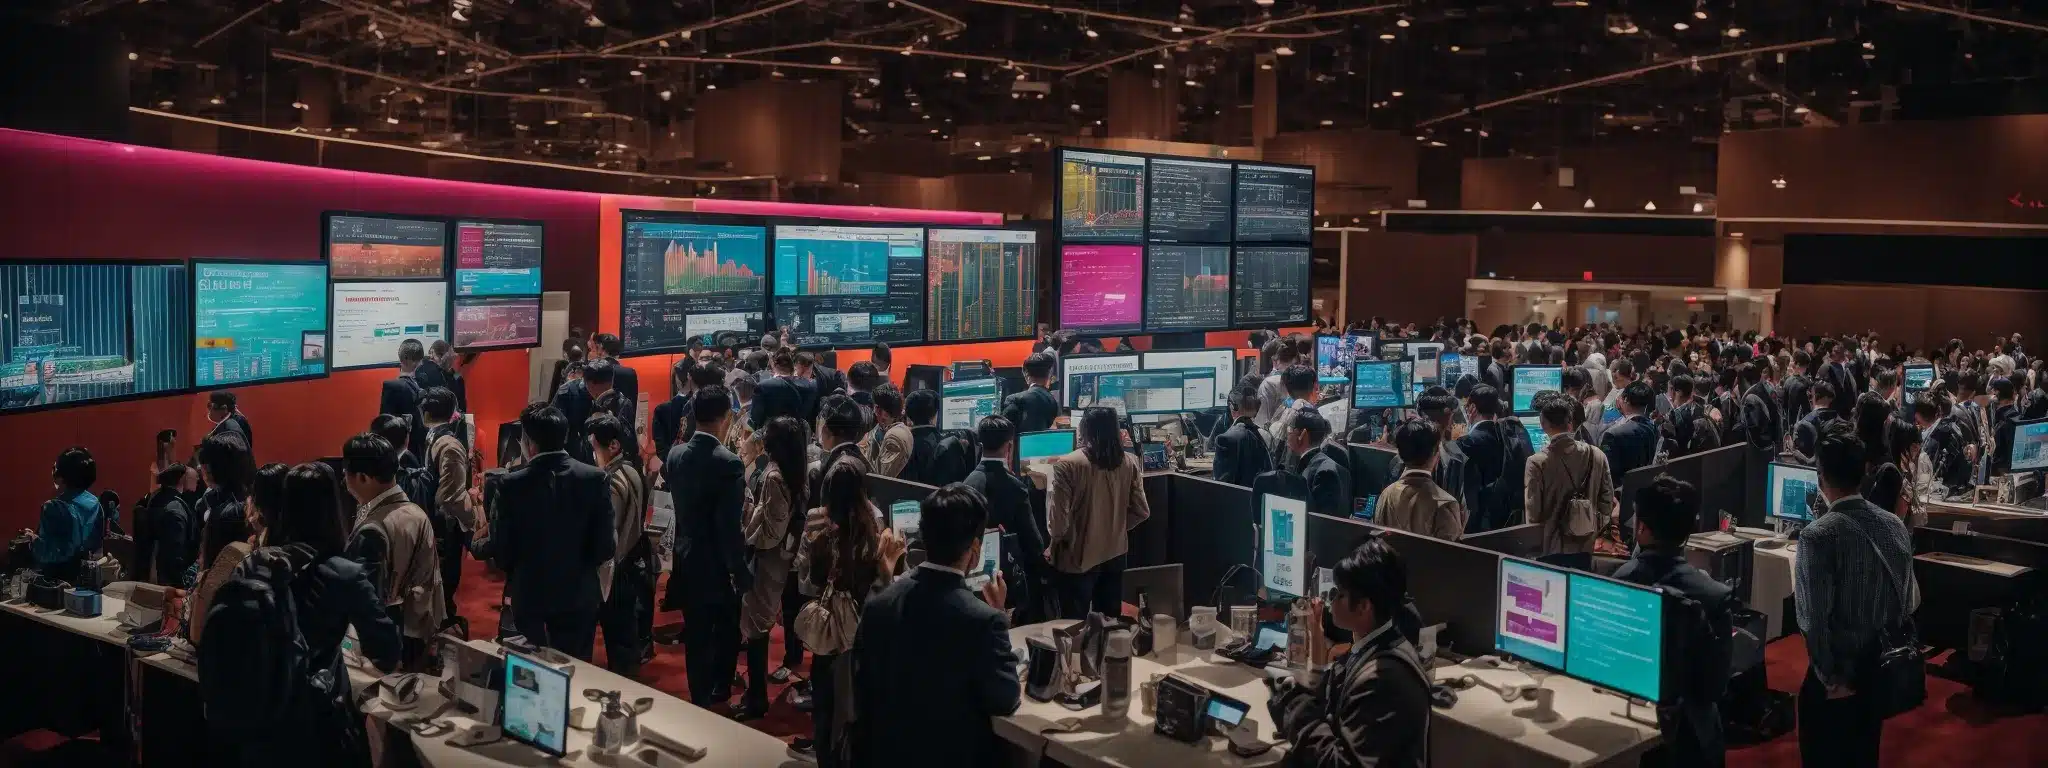 A Bustling Digital Marketing Conference Booth With Various Screens Displaying Colorful Graphs And Click-Through Rate Metrics.